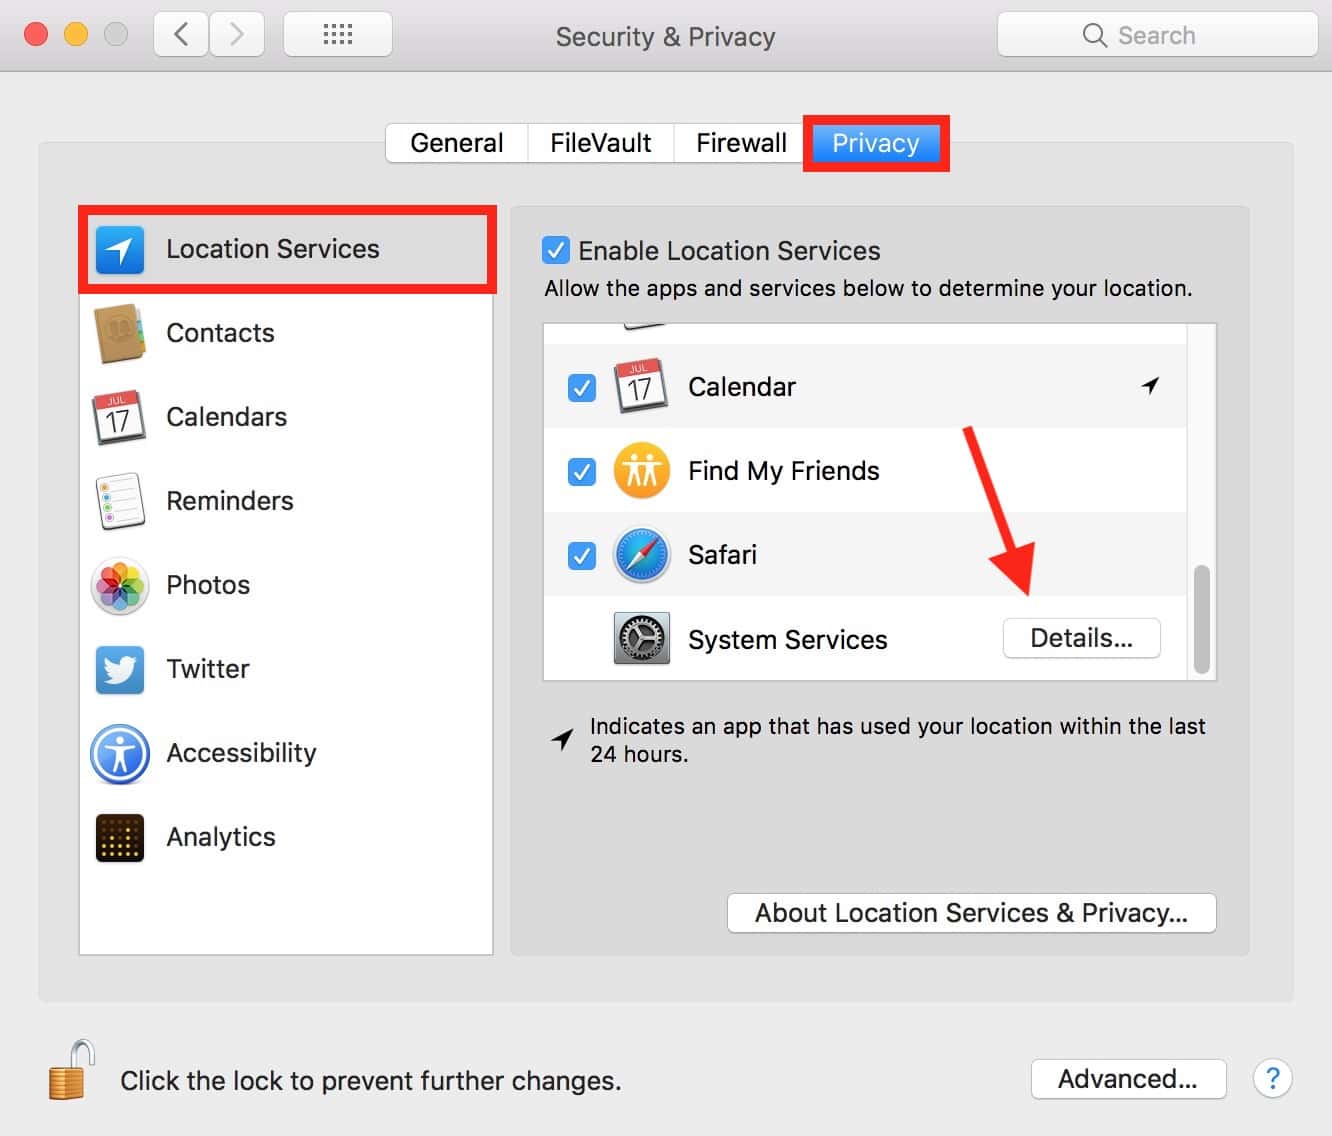 "Details" Button Under "Privacy" Tab in Security & Privacy Preferences on the Mac